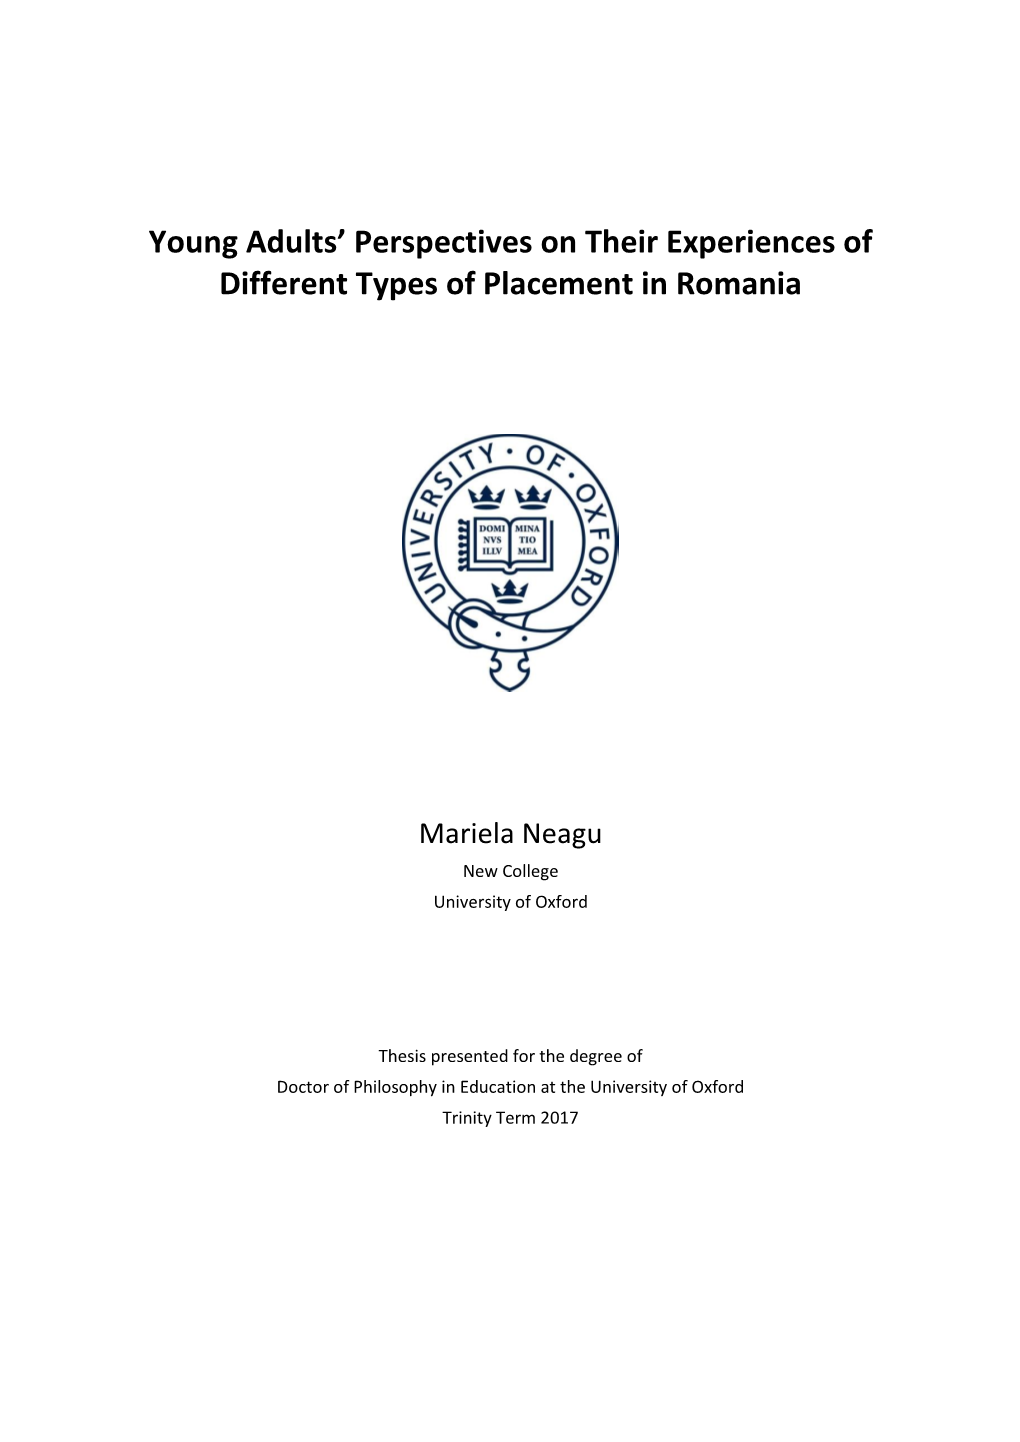 Young Adults' Perspectives on Their Experiences of Different Types Of